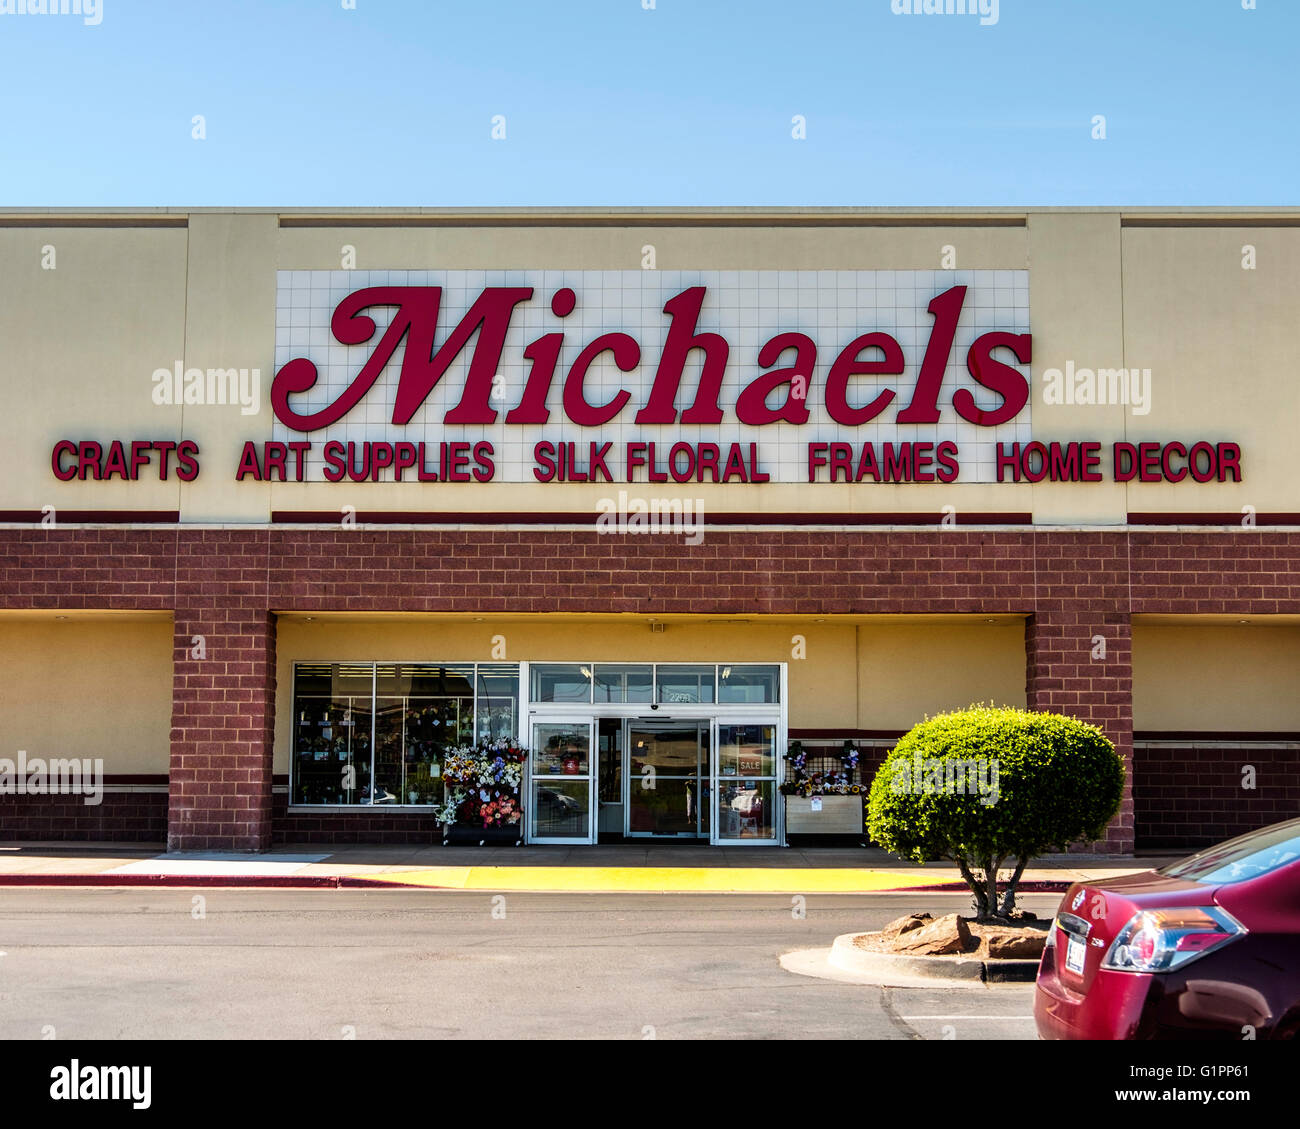 https://c8.alamy.com/comp/G1PP61/the-exterior-of-michaels-an-arts-and-crafts-store-on-memorial-road-G1PP61.jpg